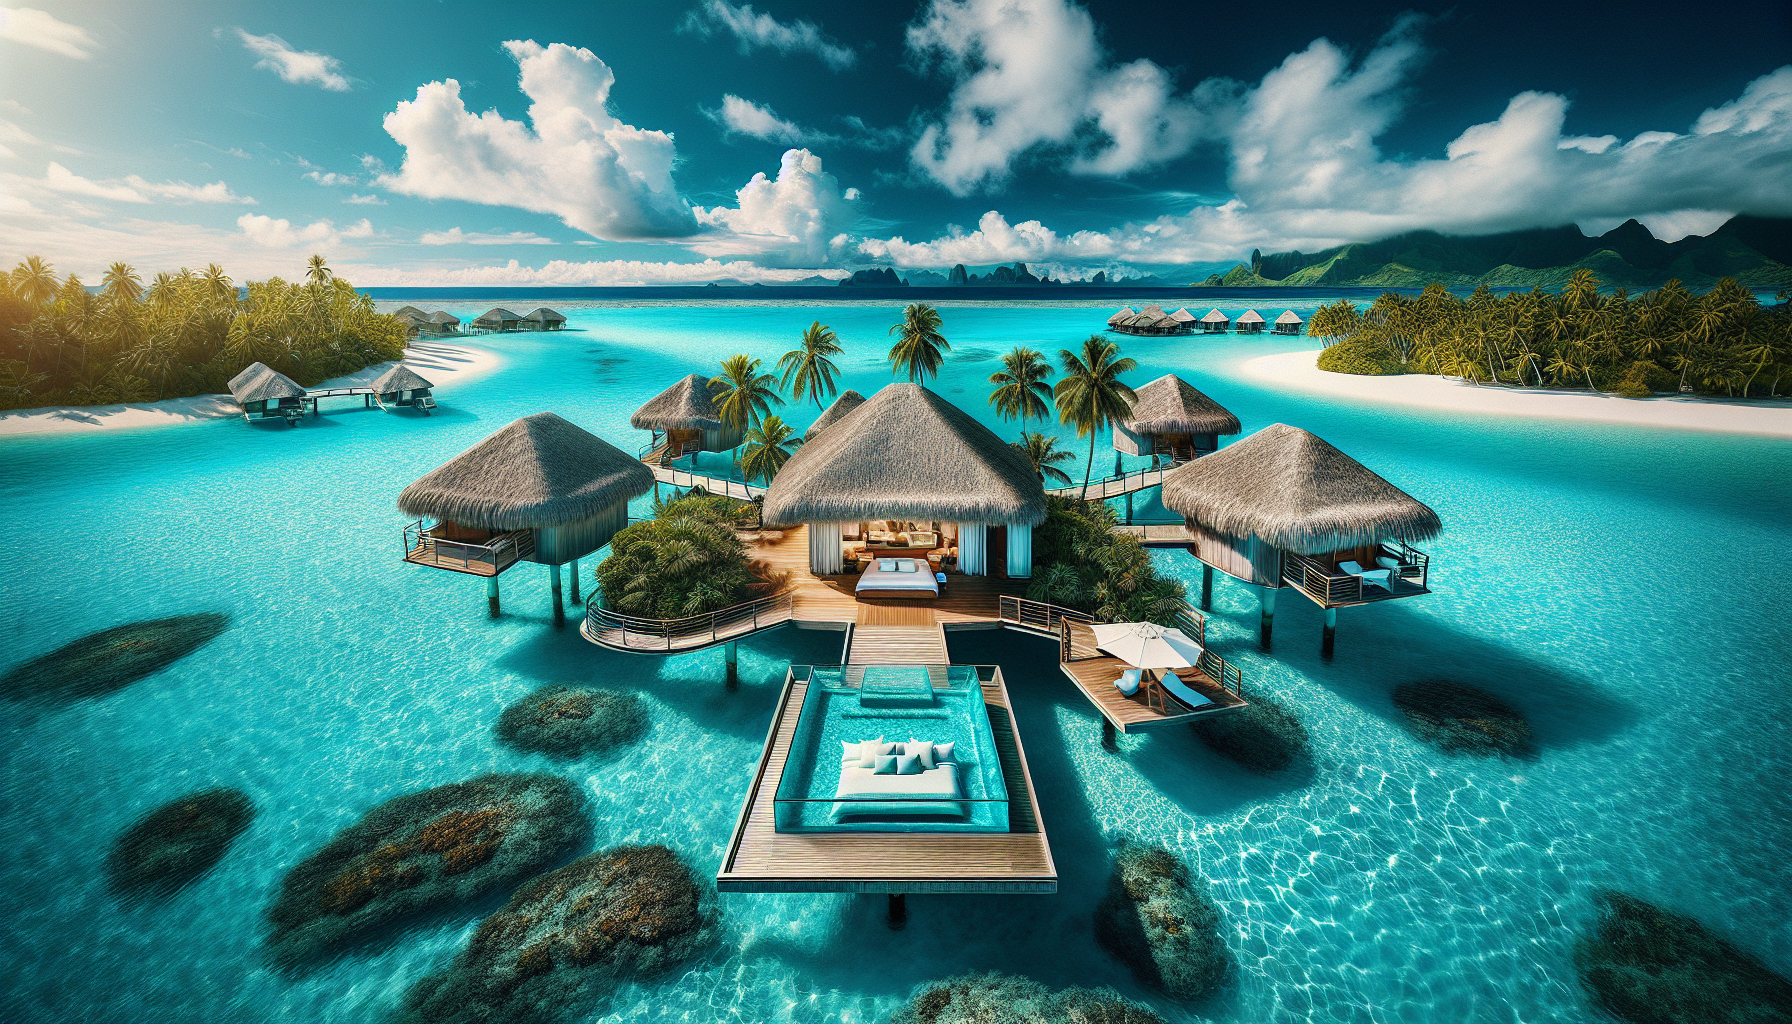 How Much Does It Cost Per Night At Bora Bora?